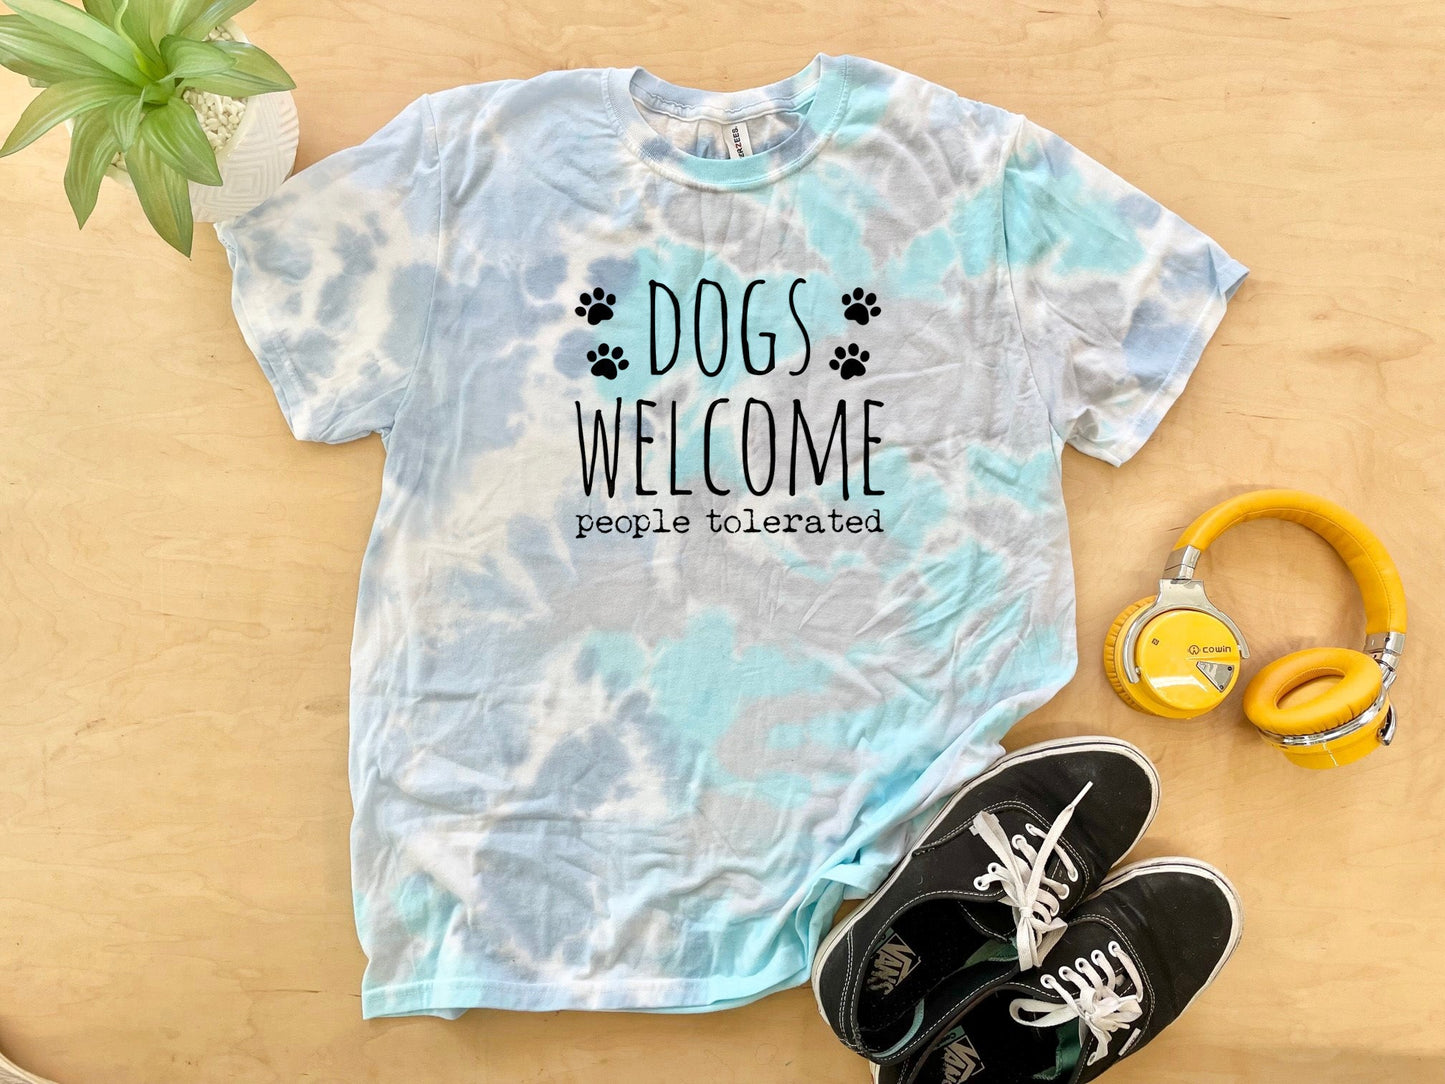 Dogs Welcome, People Tolerated - Mens/Unisex Tie Dye Tee - Blue